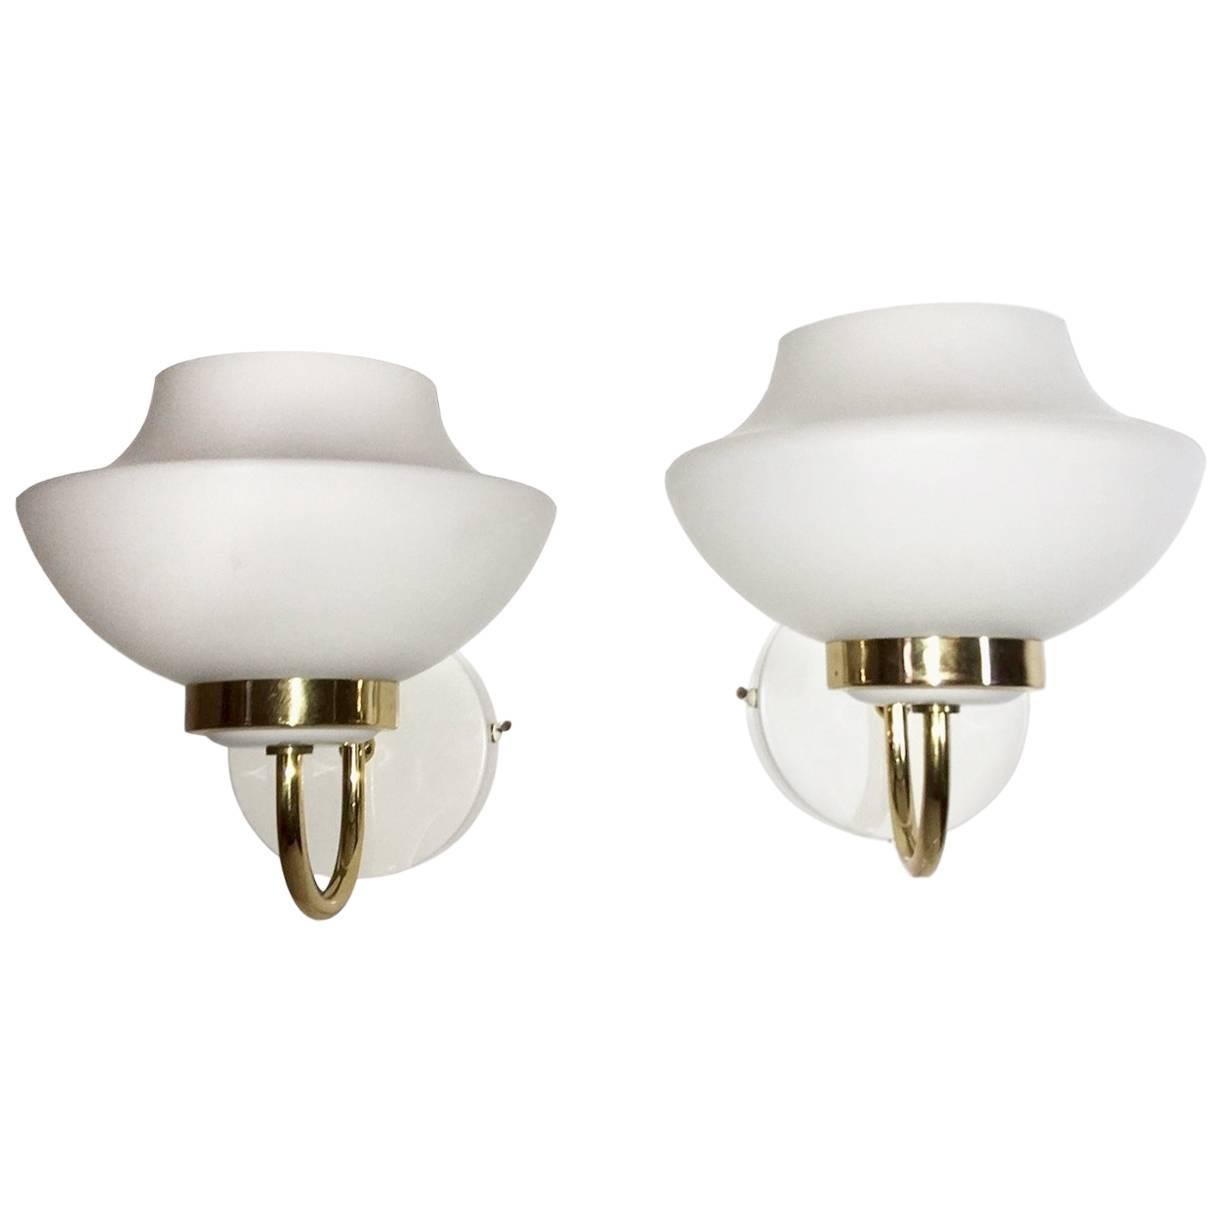 Pair of 1960s Italian UFO Form Milk Glass Shades Sconces For Sale